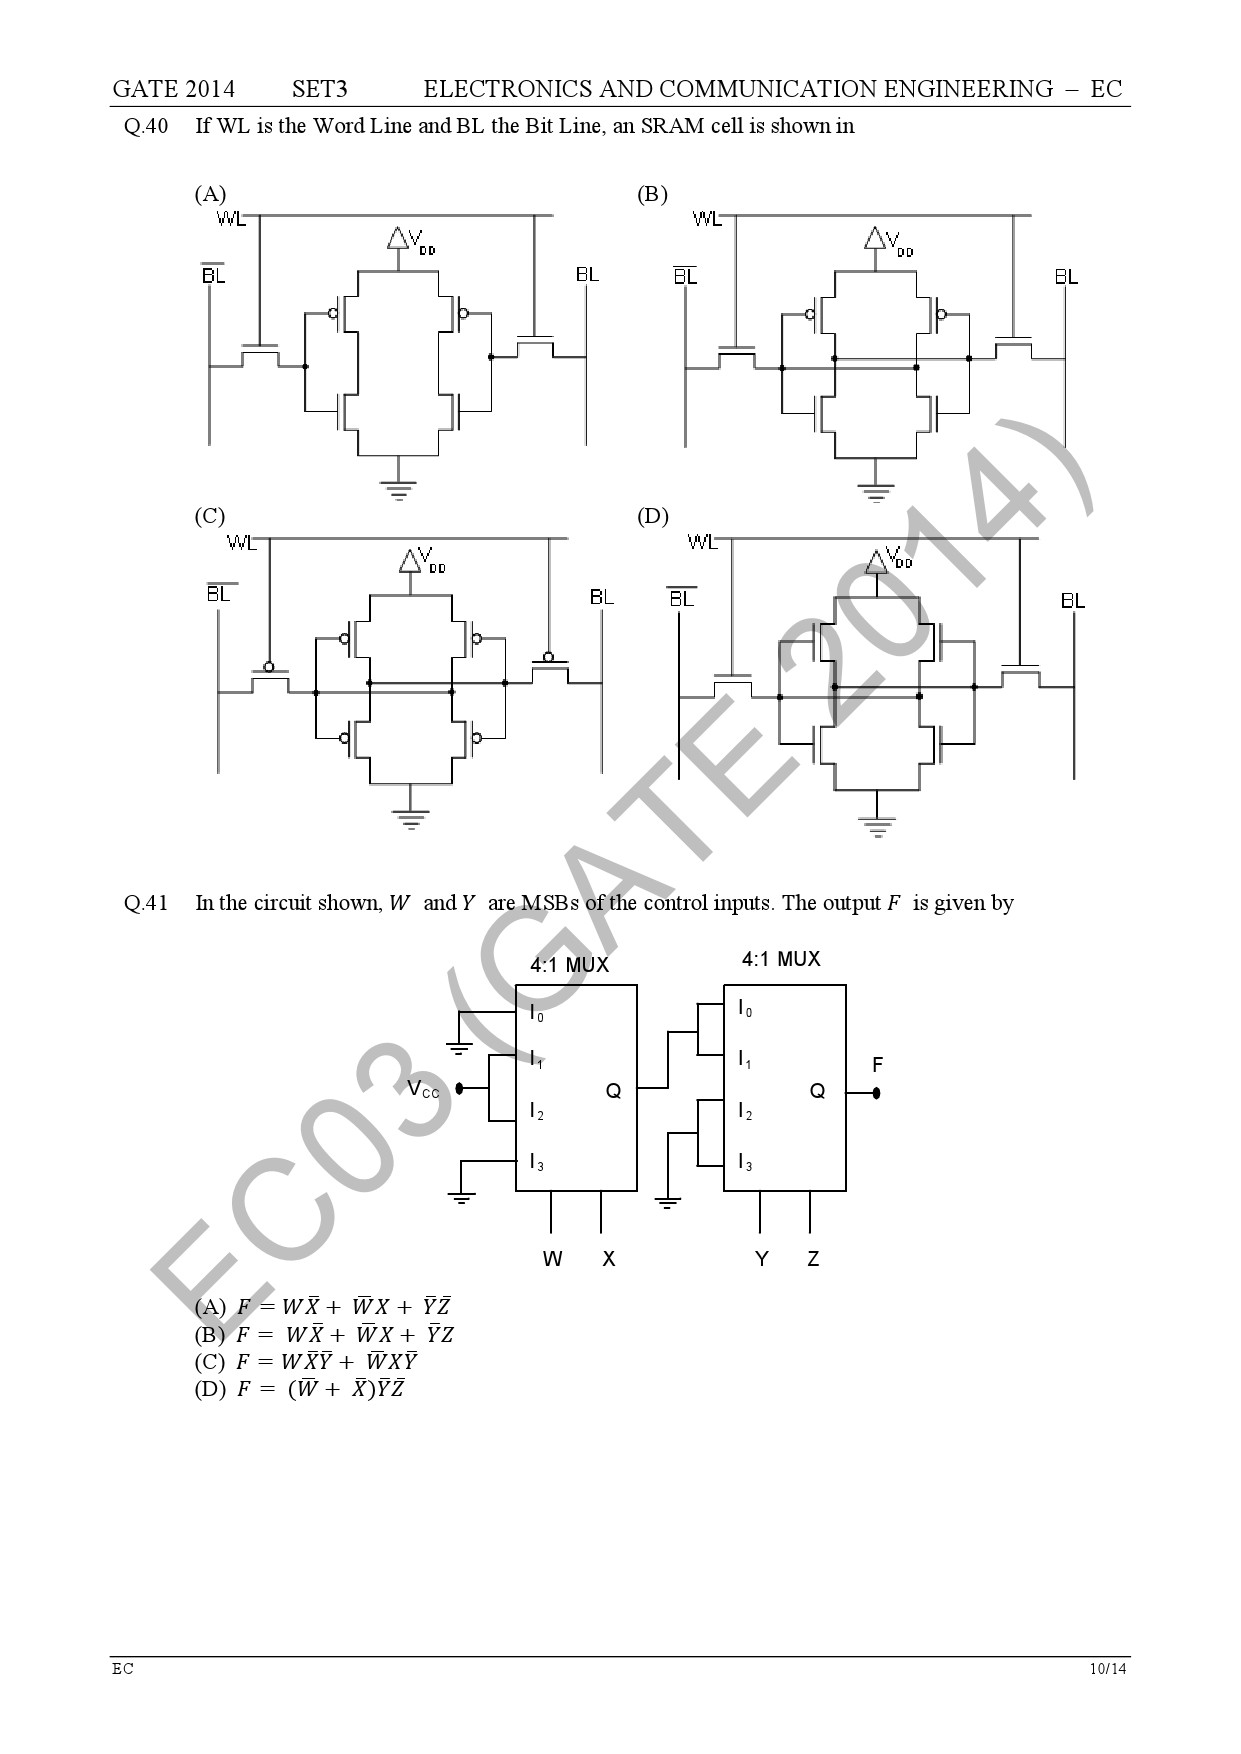 GATE Exam Question Paper 2014 Electronics and Communication Engineering Set 3 17